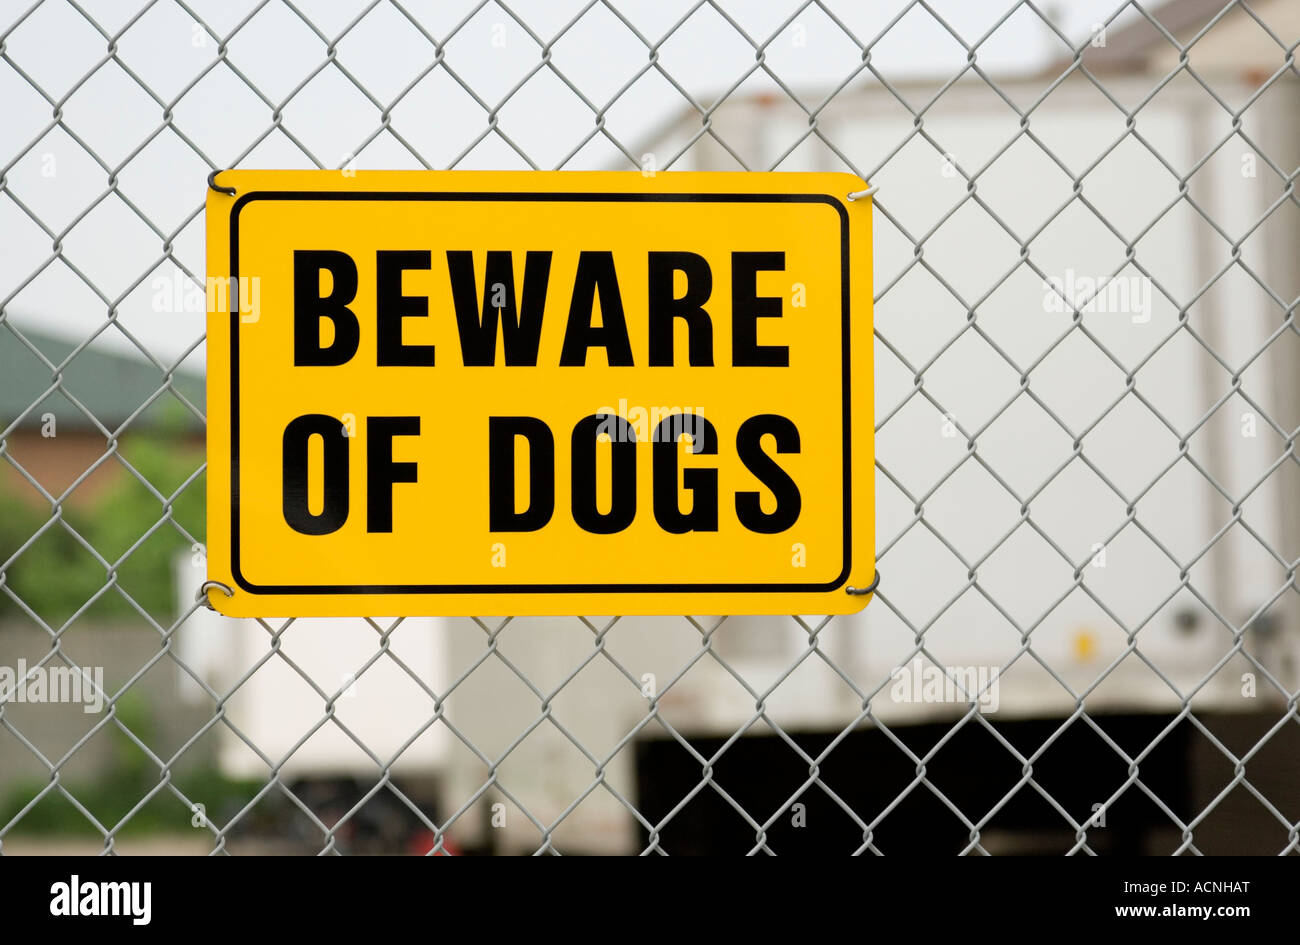 Beware of Dogs sign on chain link fence Stock Photo